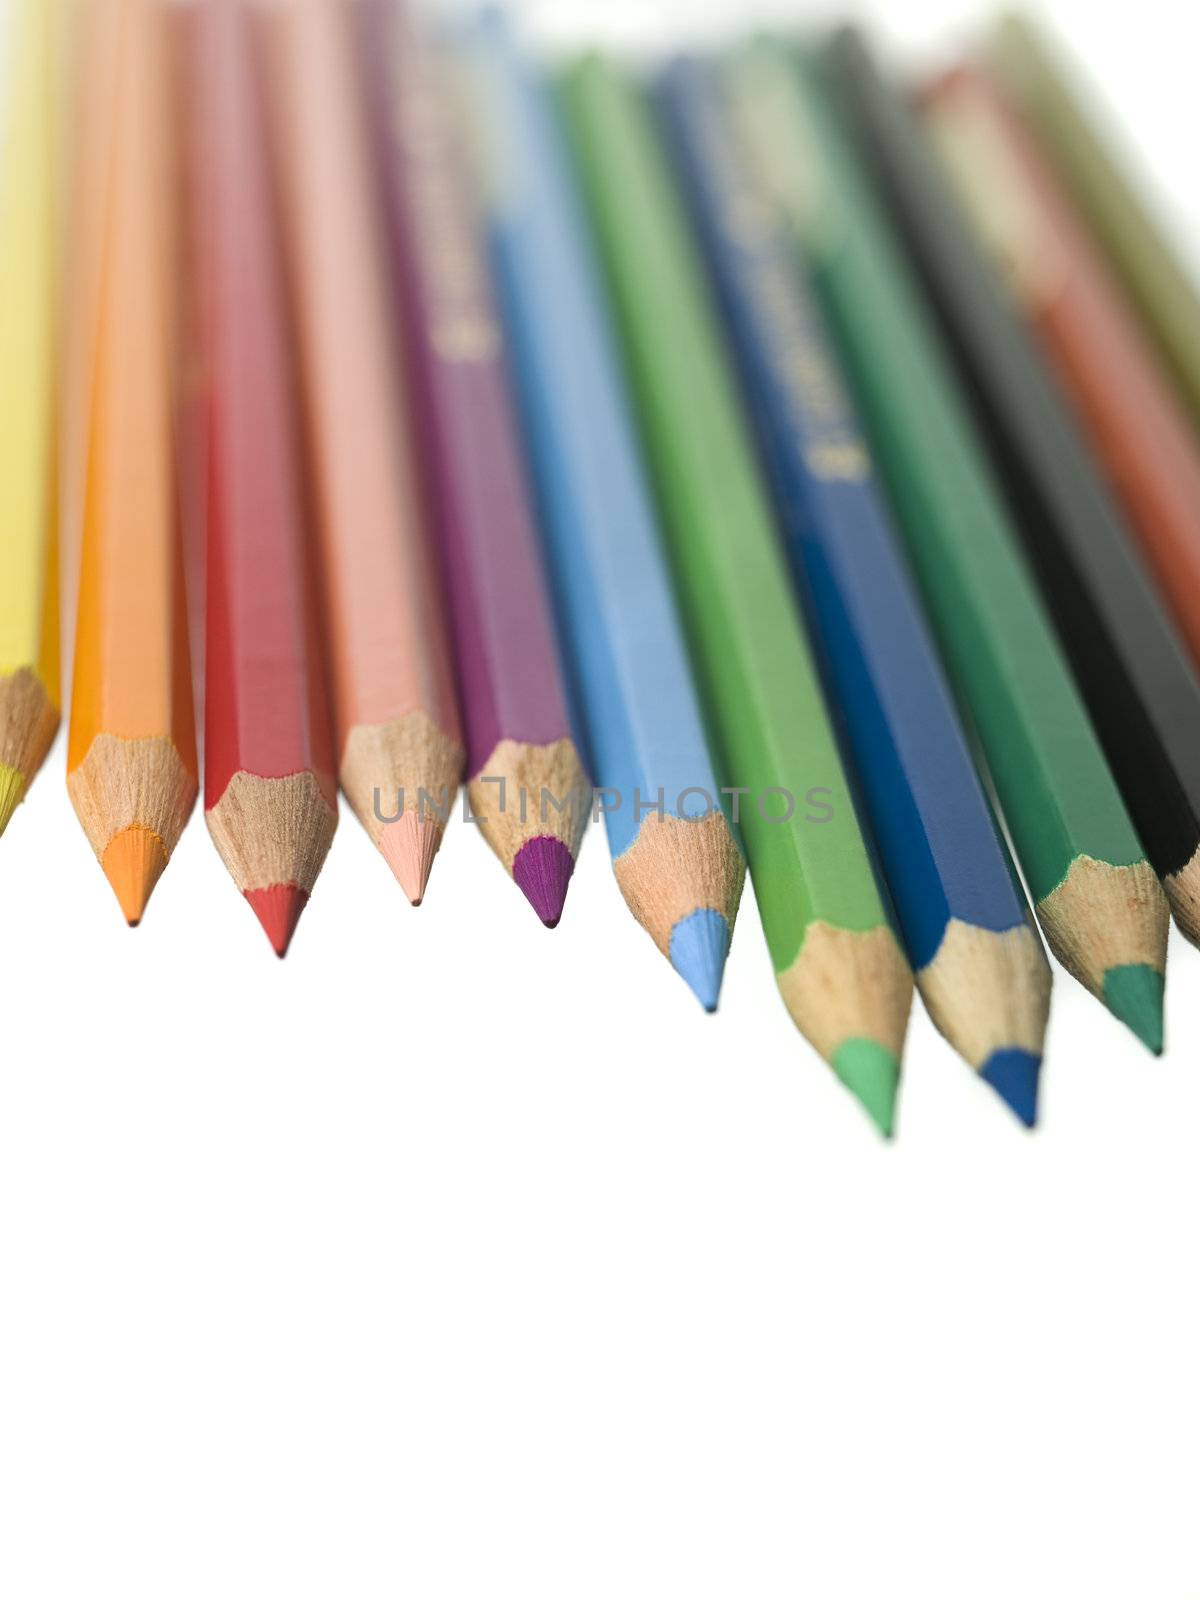 Row of colored pencil